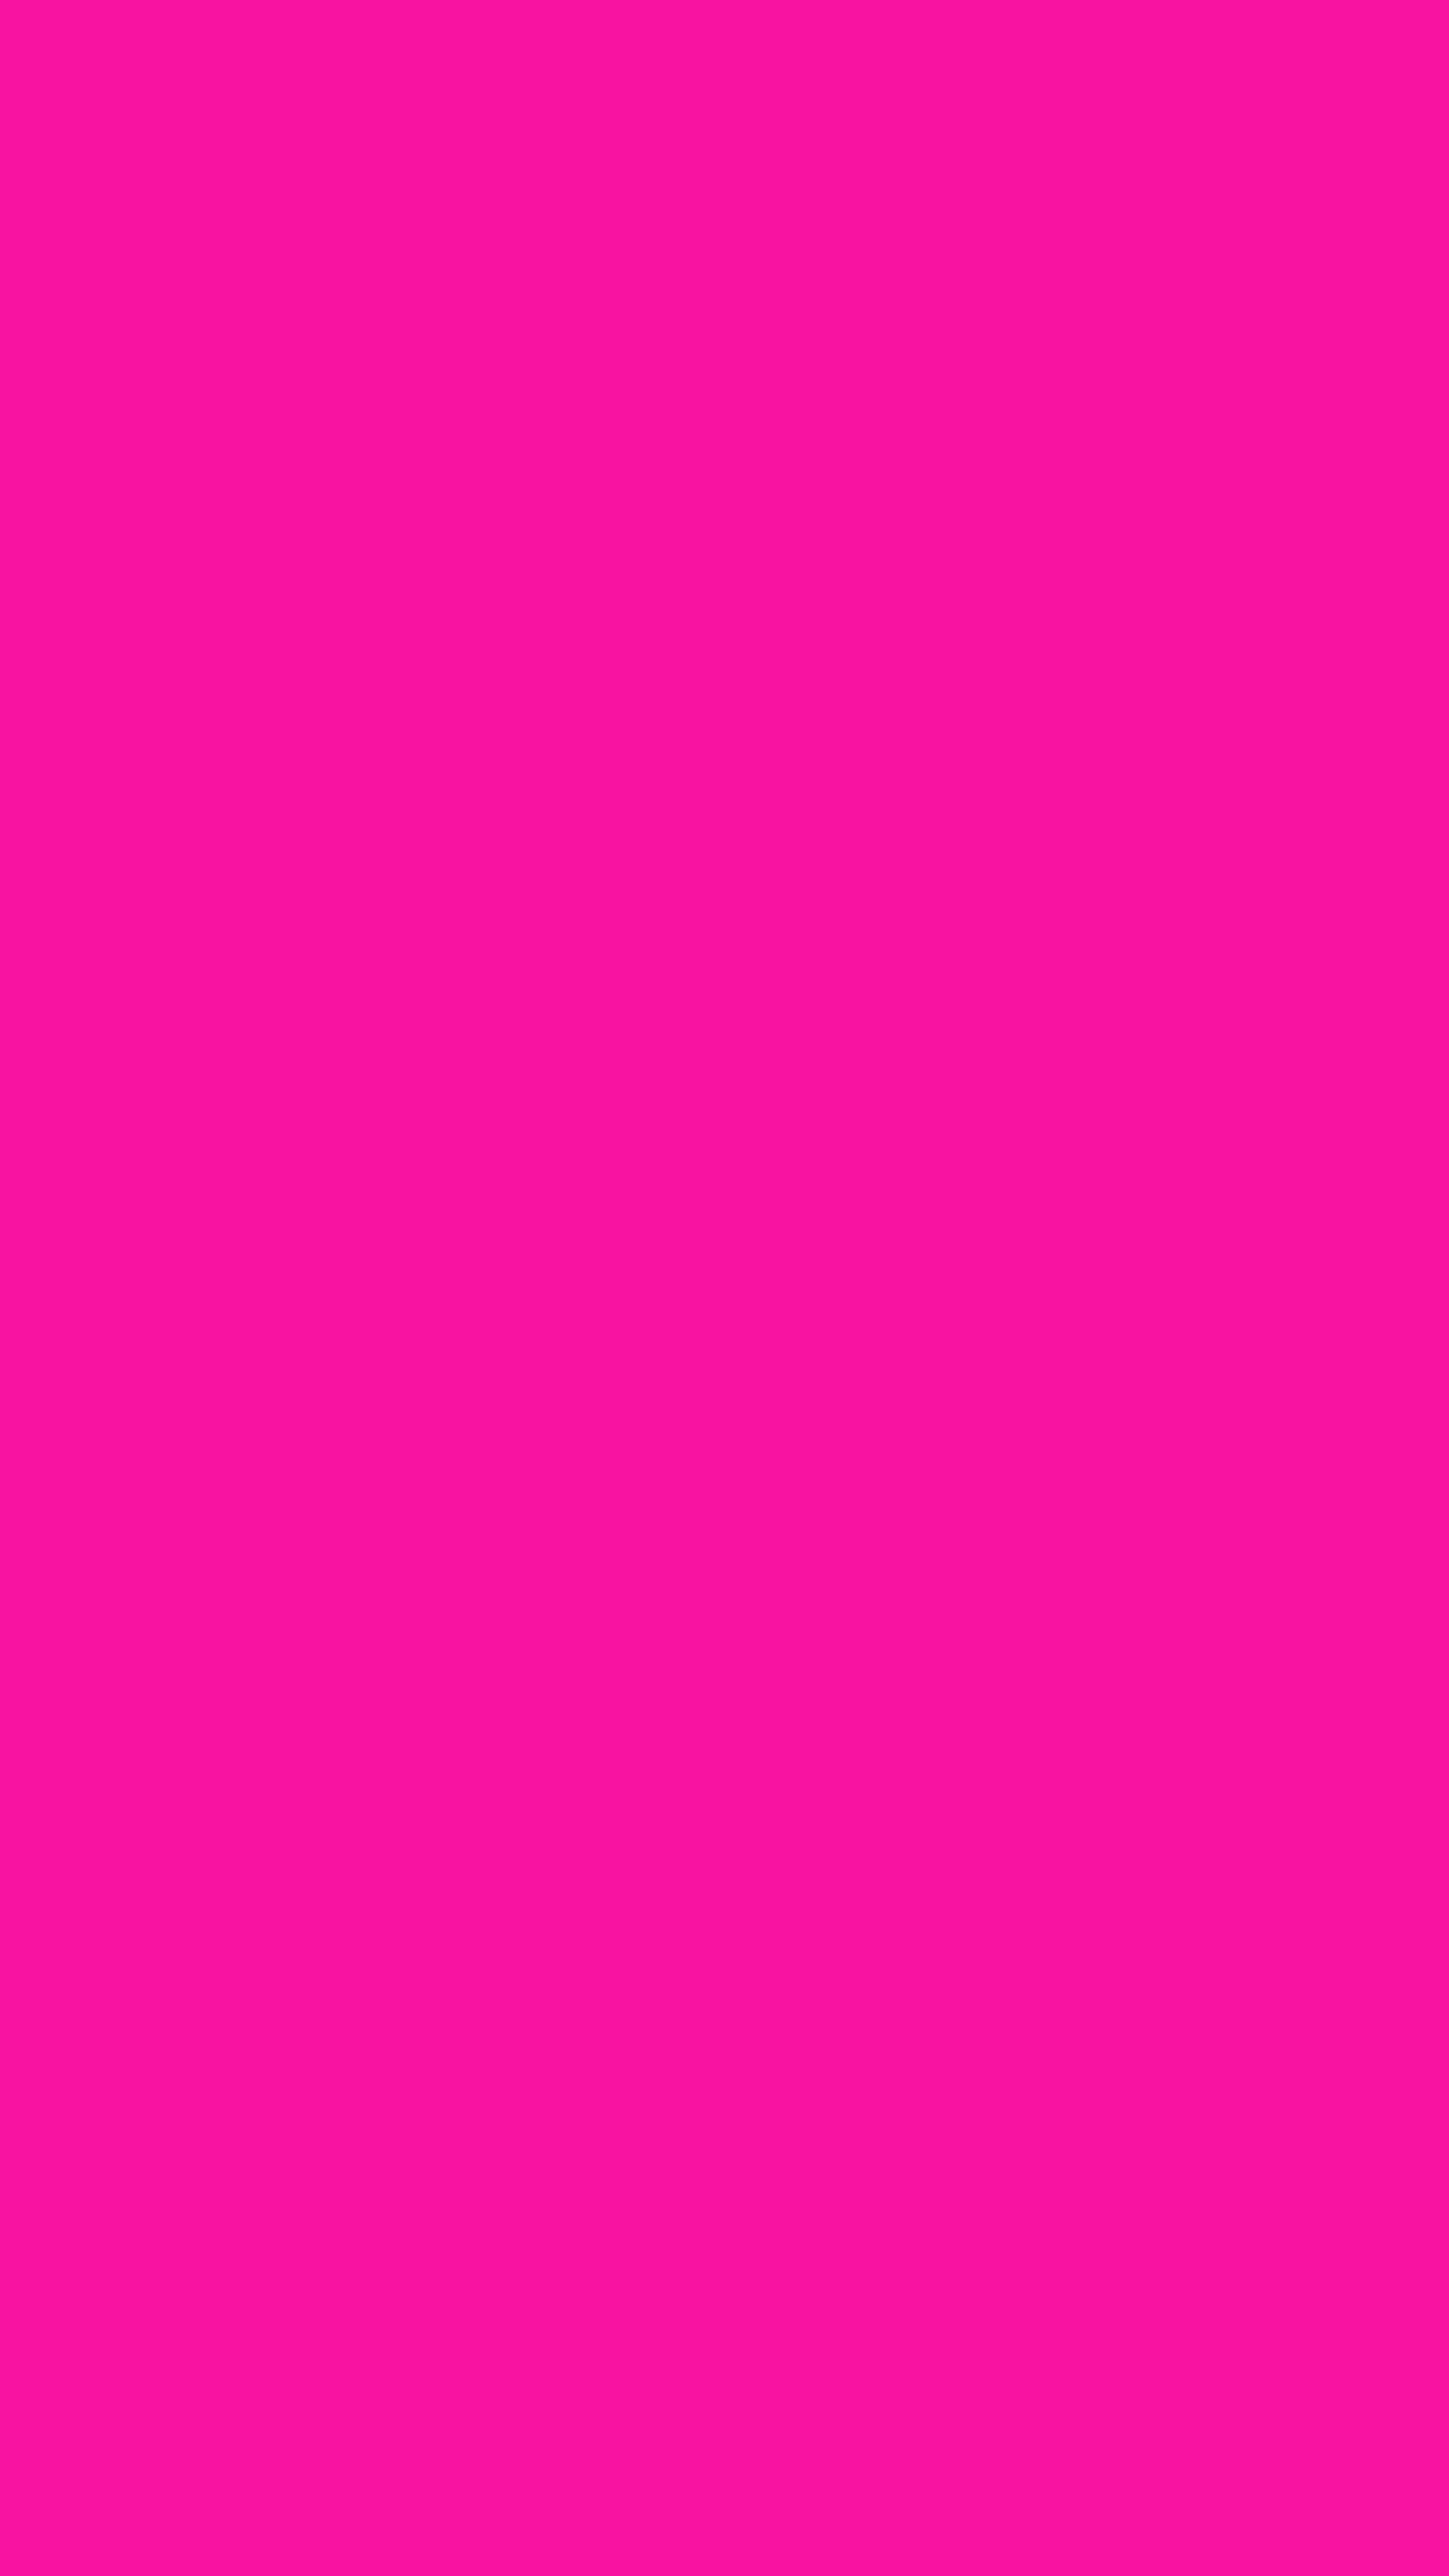 android background, pink, texture, textures, color